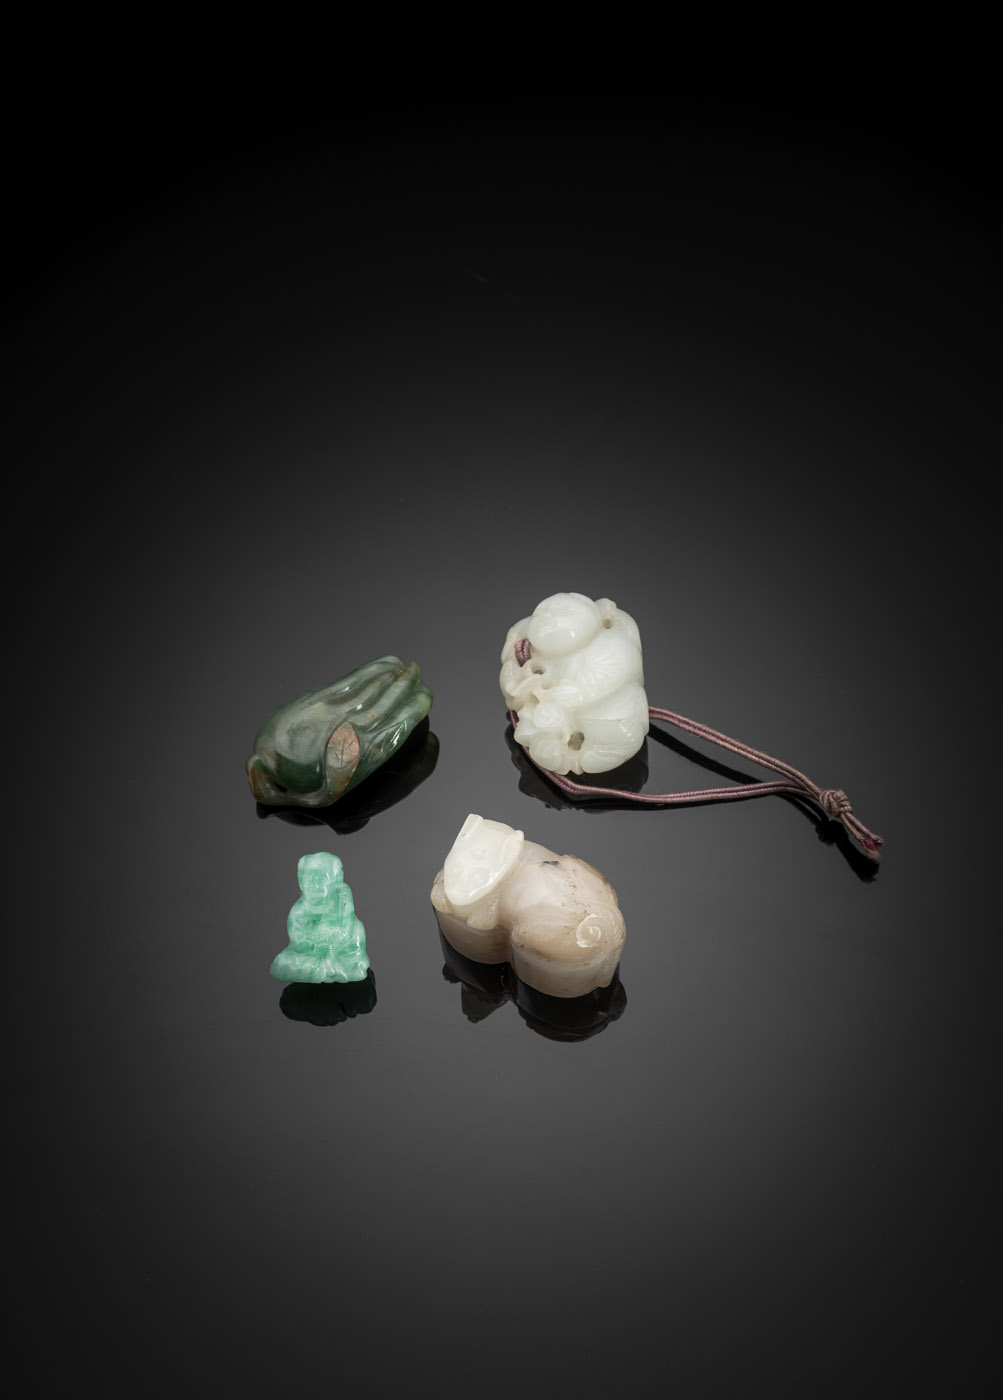 <b>A GROUP OF FOUR JADE CARVINGS WITH A FINGER CITRON, A BOY WITH COINS, A SMALL JADEITE PENDANT AND A SEAL</b>